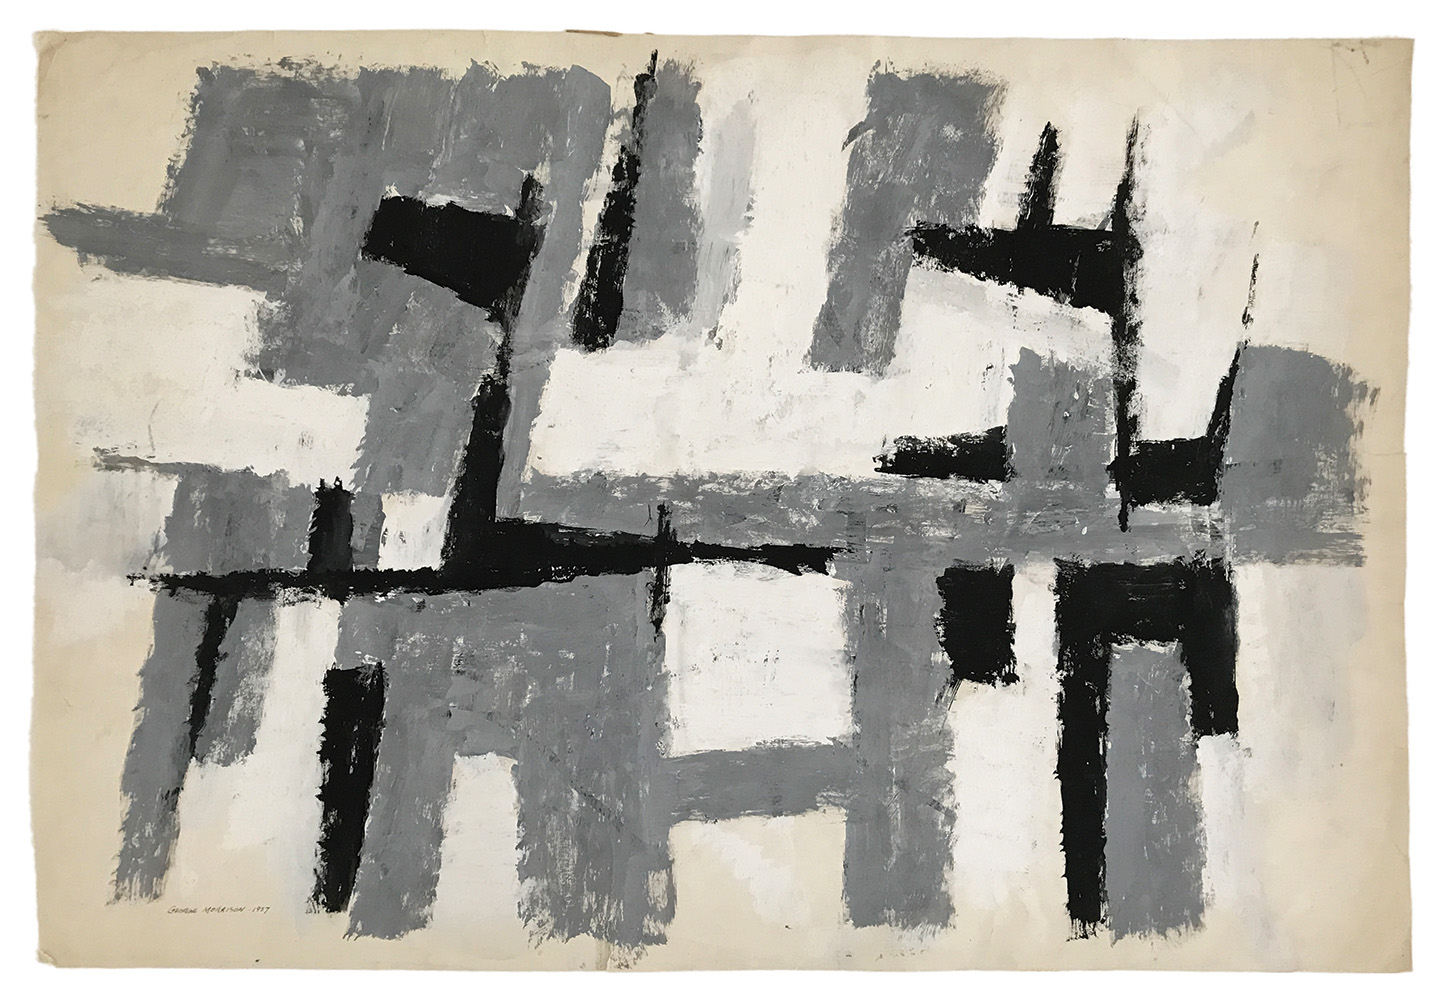 Untitled, 1957
gouache on paper
23 x 35 inches